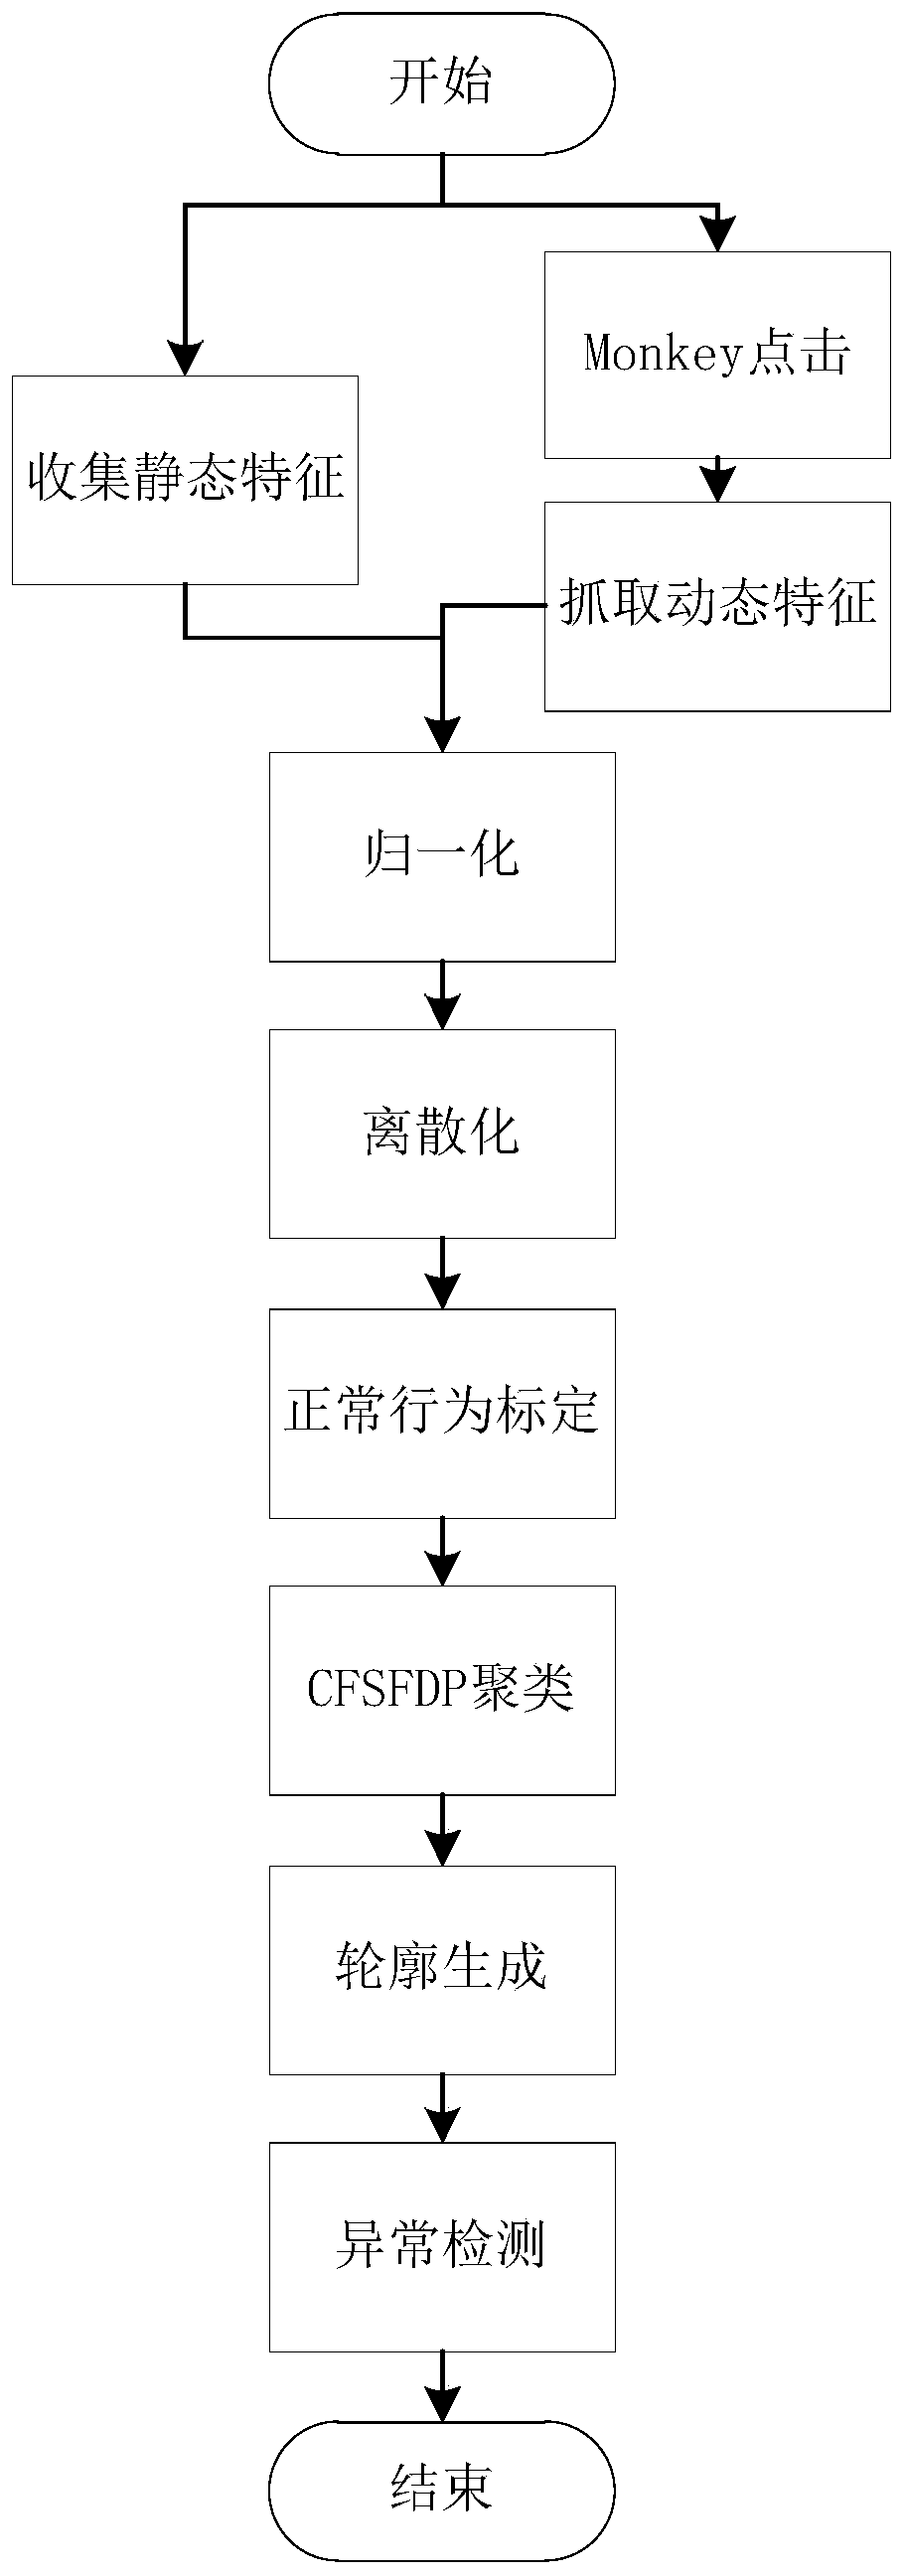 A method of intrusion detection for android platform based on cfsfdp clustering